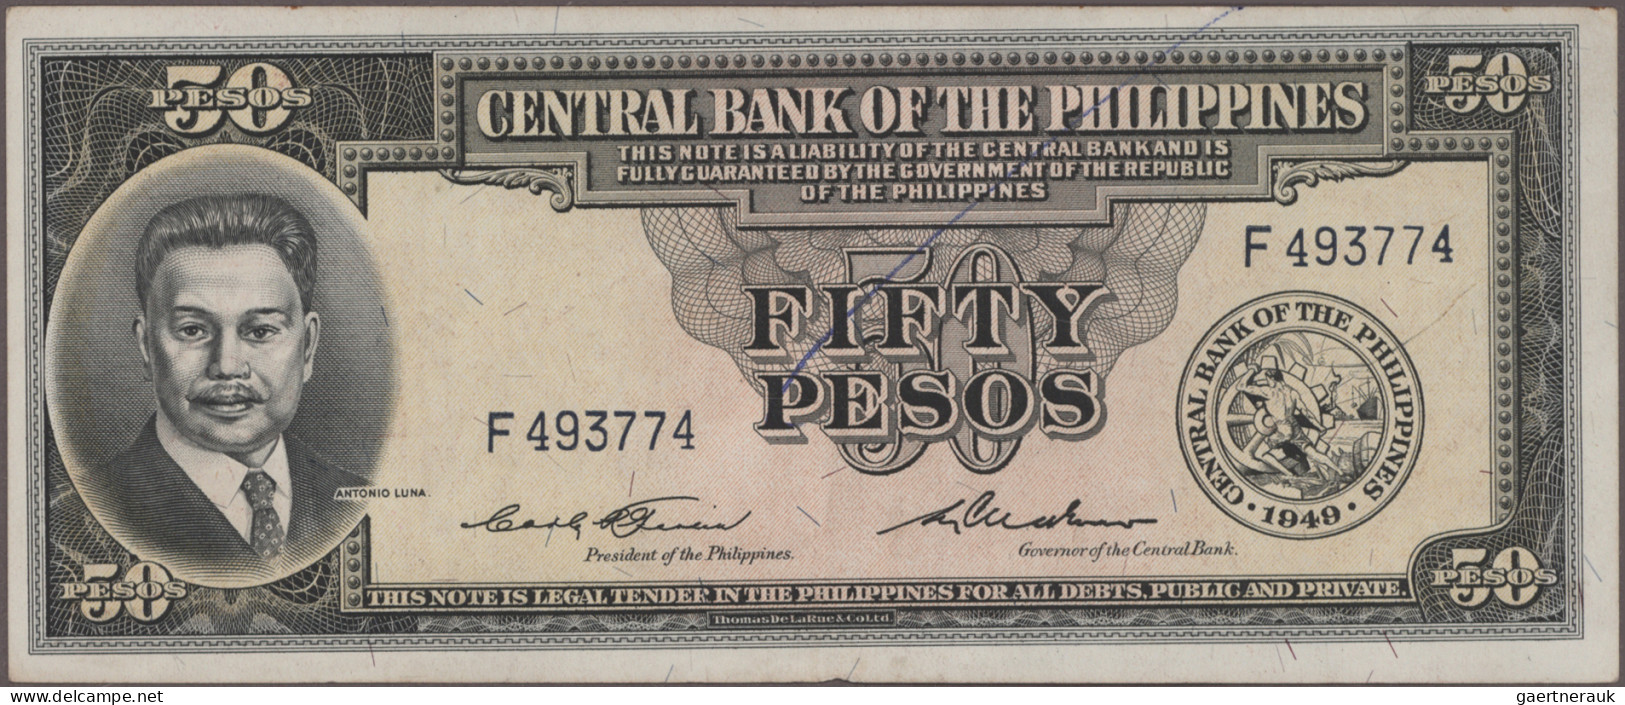 Philippines: Bank of the Philippine Islands and Central Bank of the Philippines,